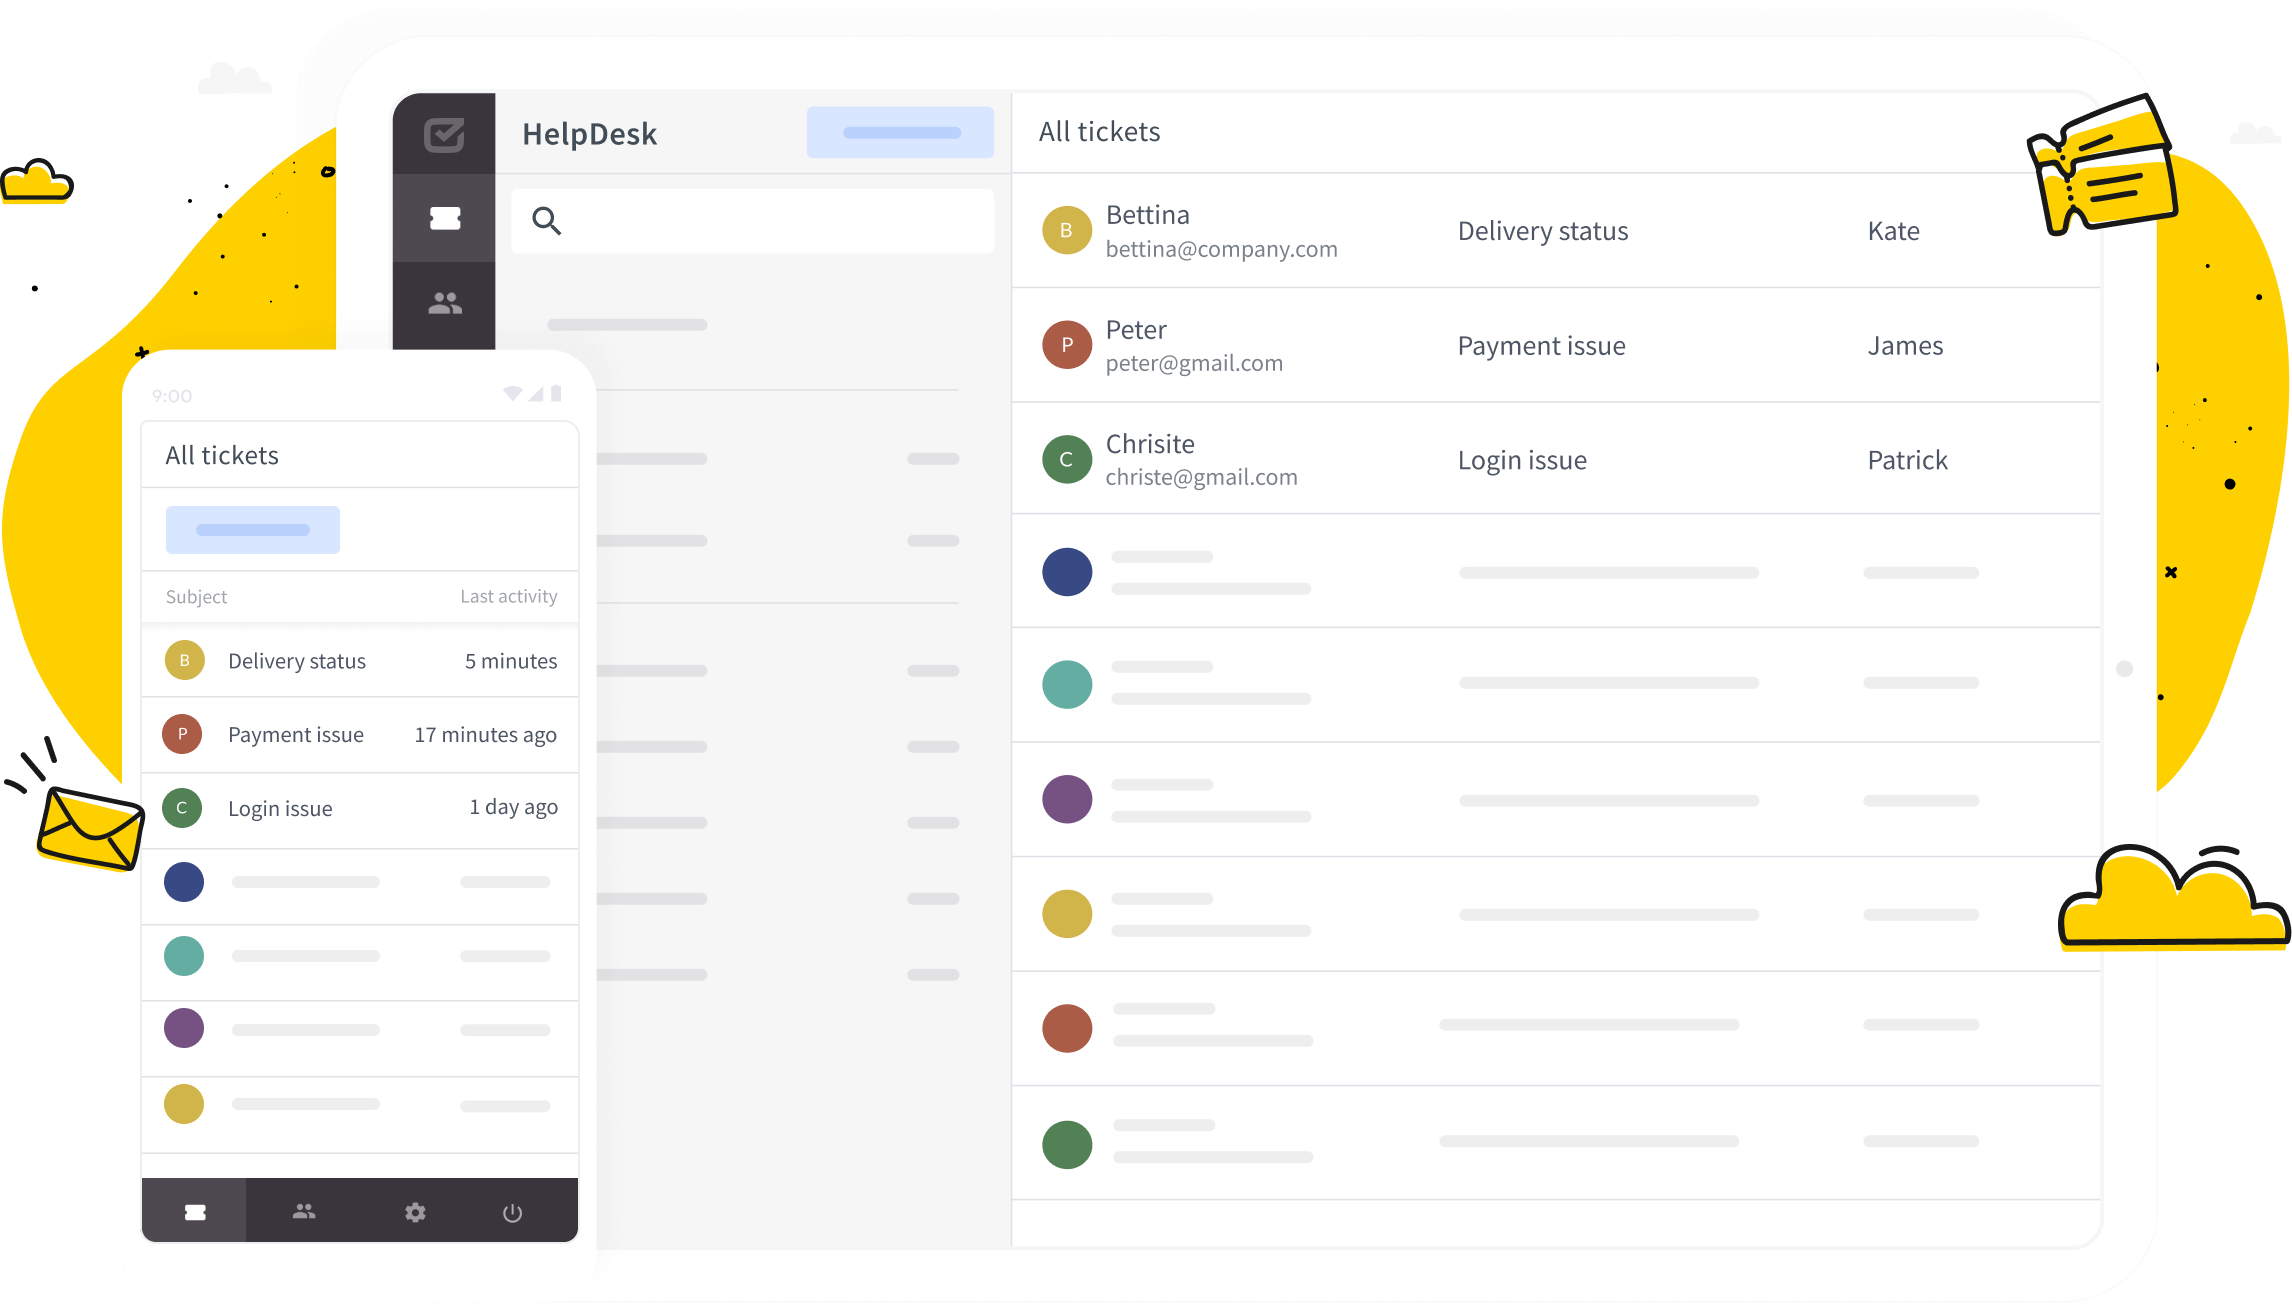 HelpDesk application on desktop and mobile with small illustrations of tickets, clouds, and evelopes